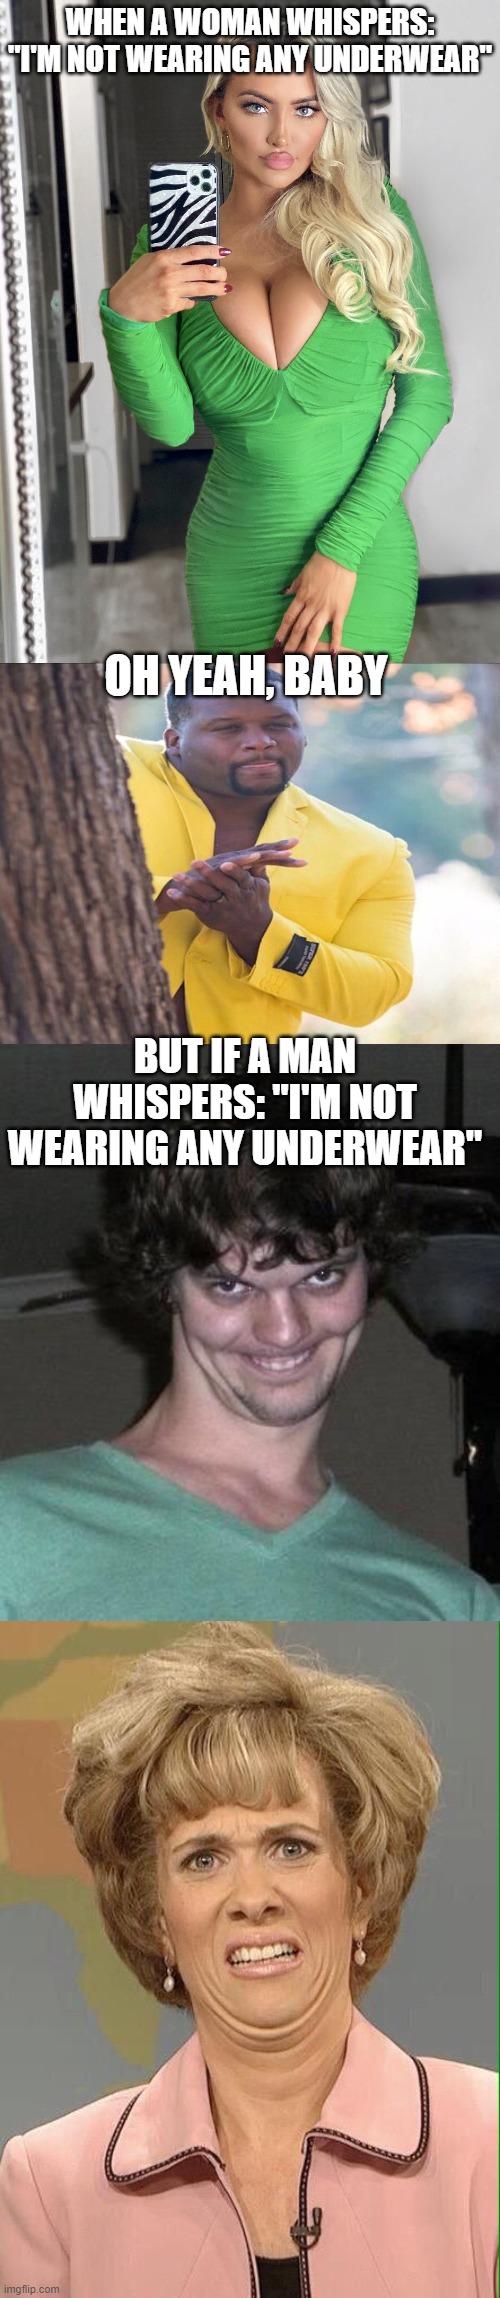 WHEN A WOMAN WHISPERS: "I'M NOT WEARING ANY UNDERWEAR"; OH YEAH, BABY; BUT IF A MAN WHISPERS: "I'M NOT WEARING ANY UNDERWEAR" | image tagged in green dress,yellow jacket,creepy guy,eww | made w/ Imgflip meme maker